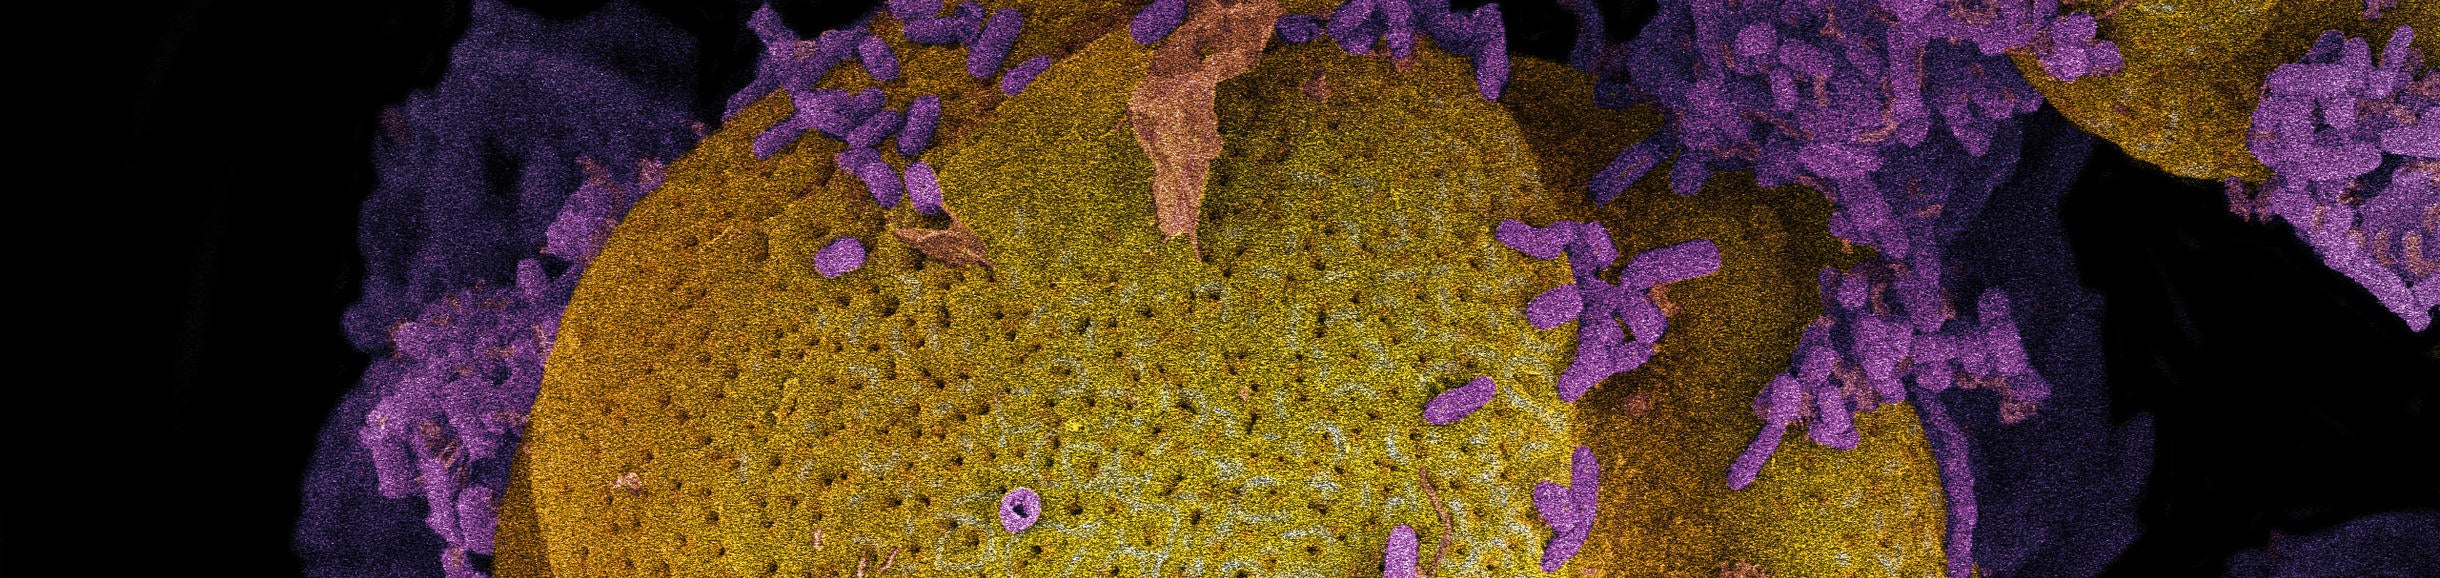 Pollen covered in bacteria from the honey bee jindgut